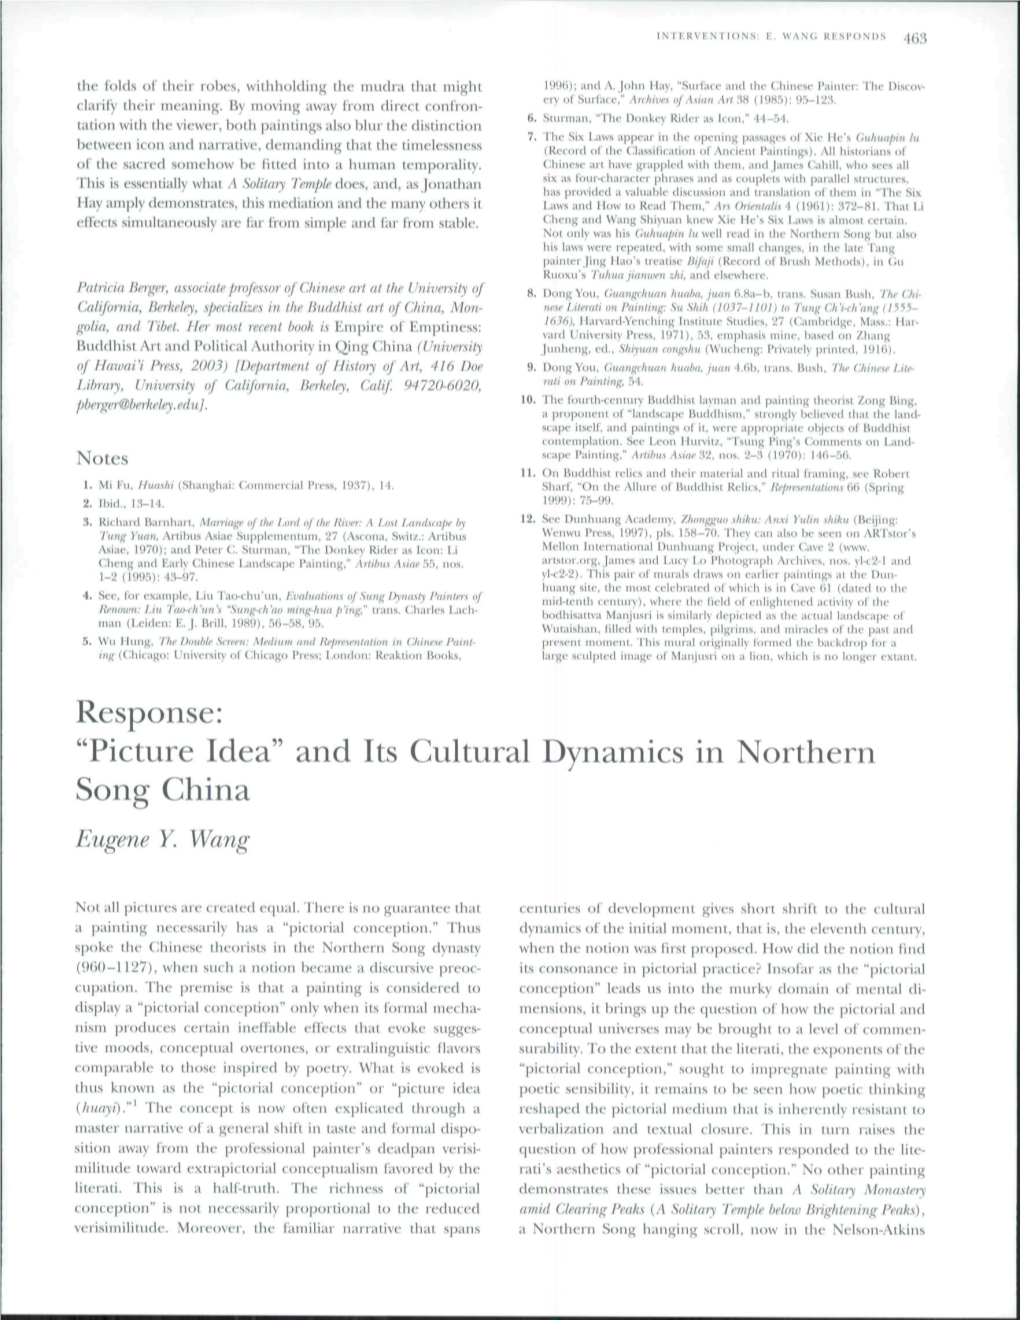 Response: "Picture Idea" and Its Cultural Dynamics in Northern Song China Eugene Y